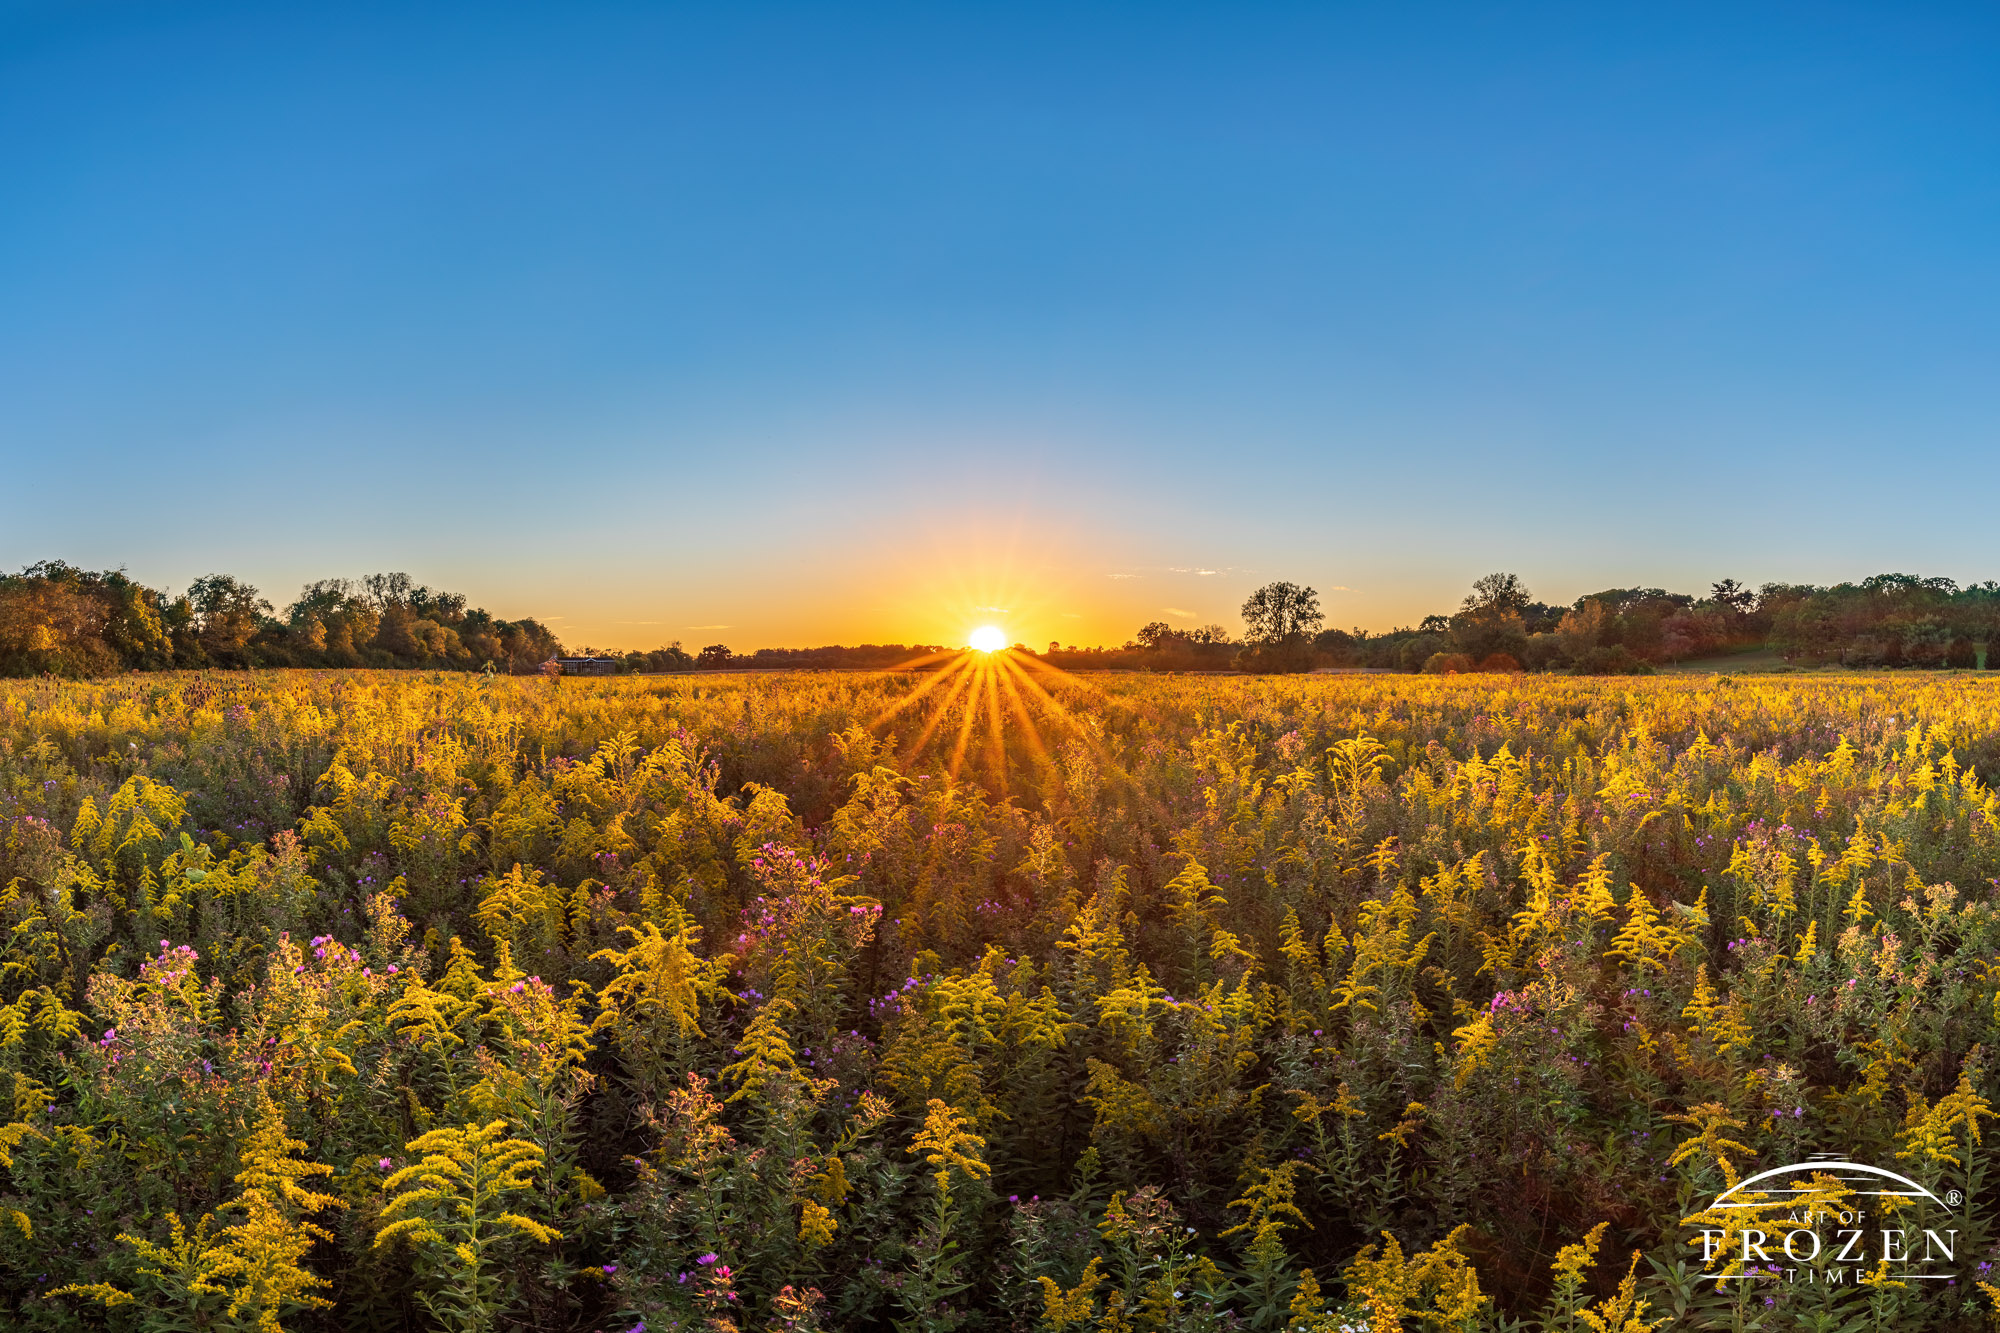 A former Revolutionary War battle site now serves as a tall-grass prairie where Ohio Goldenrods catch the last rays from the setting sun